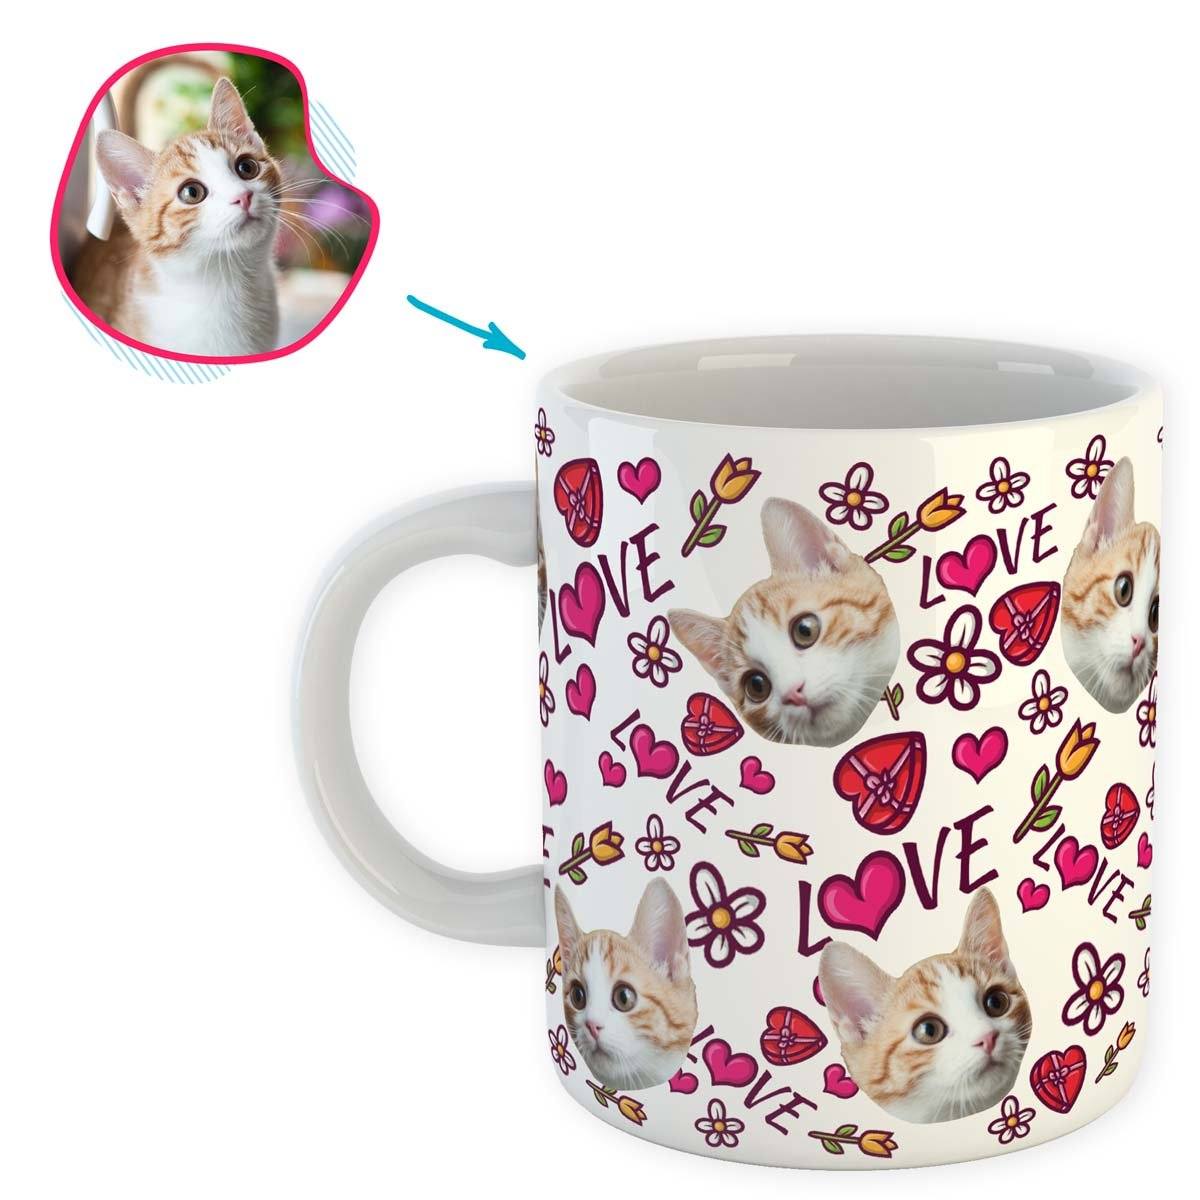 white Hearts and Flowers mug personalized with photo of face printed on it